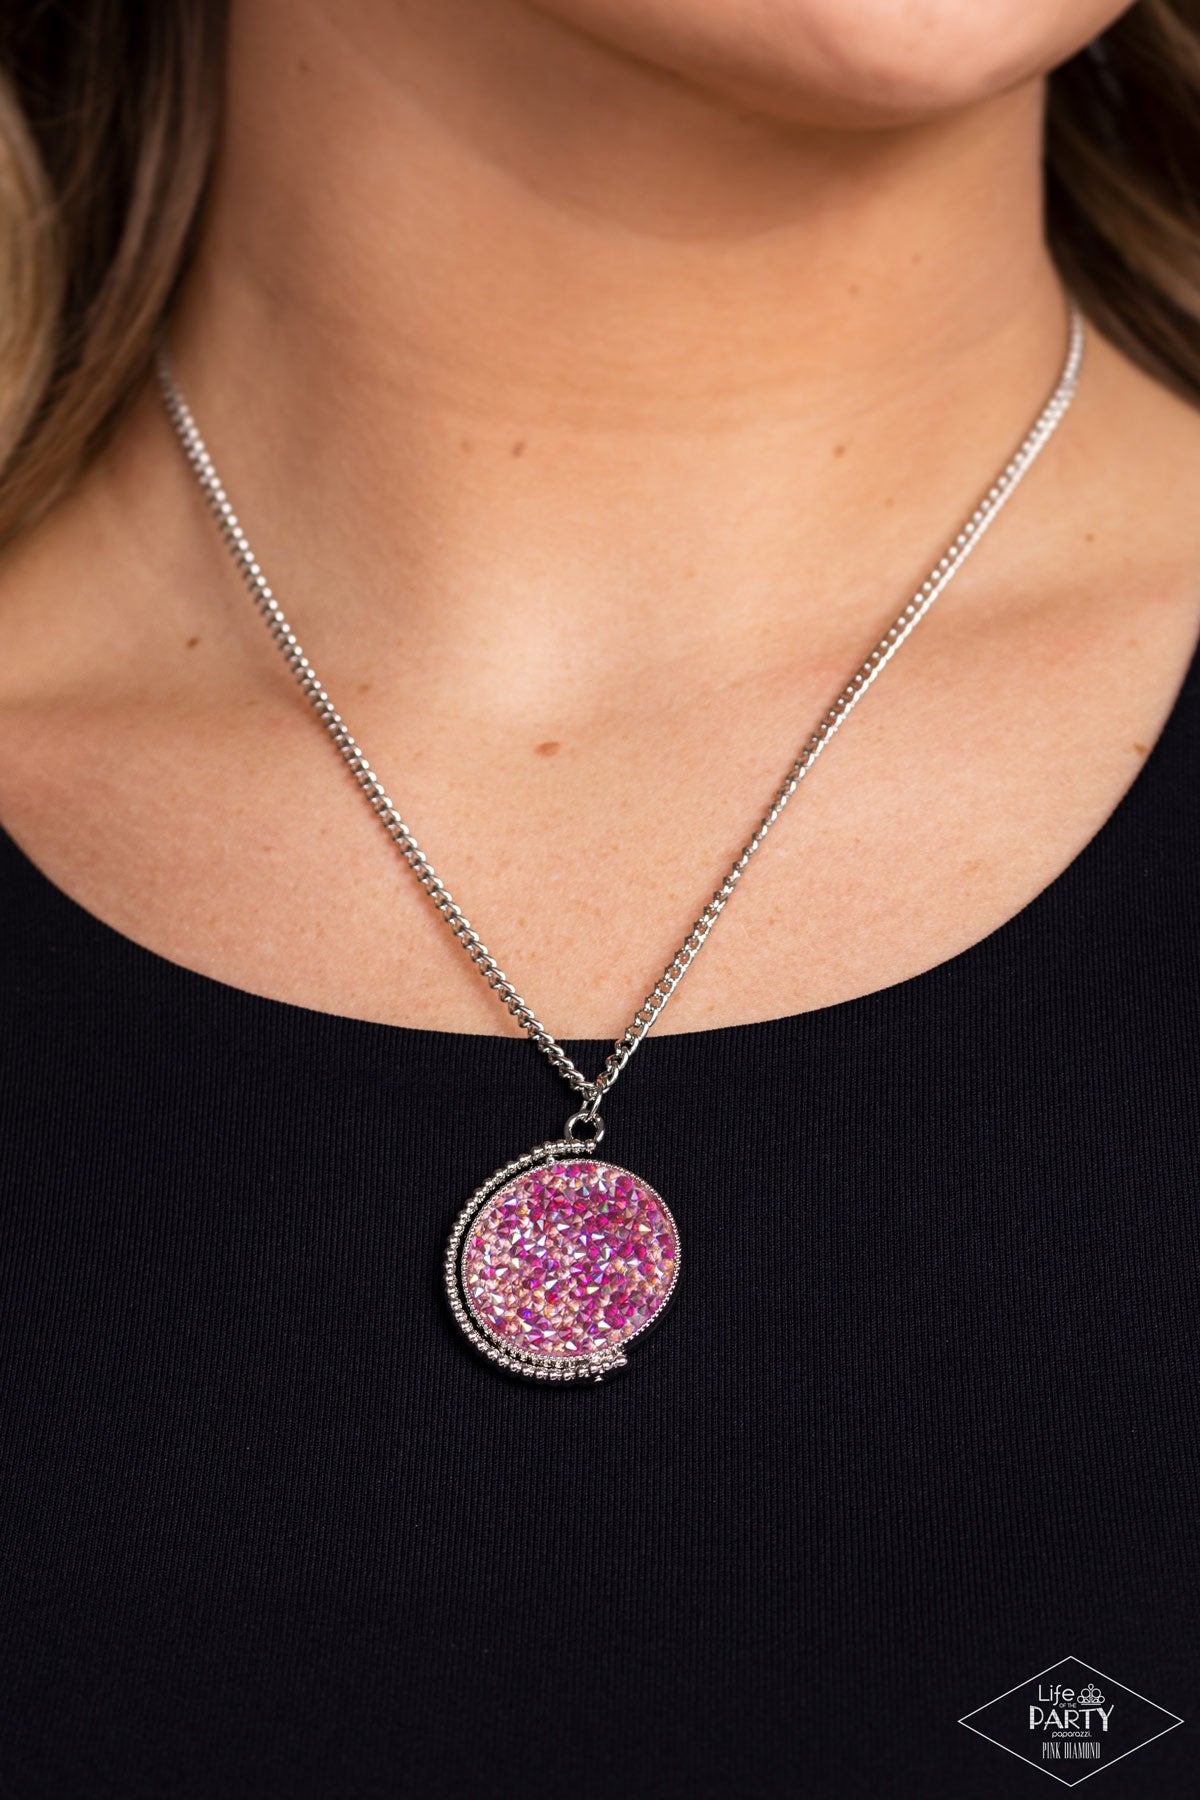 MY MOON AND STARS - MULTI BLUE PINK DRUZY SWIVEL DROOZY GENDER REVEAL NECKLACE SET